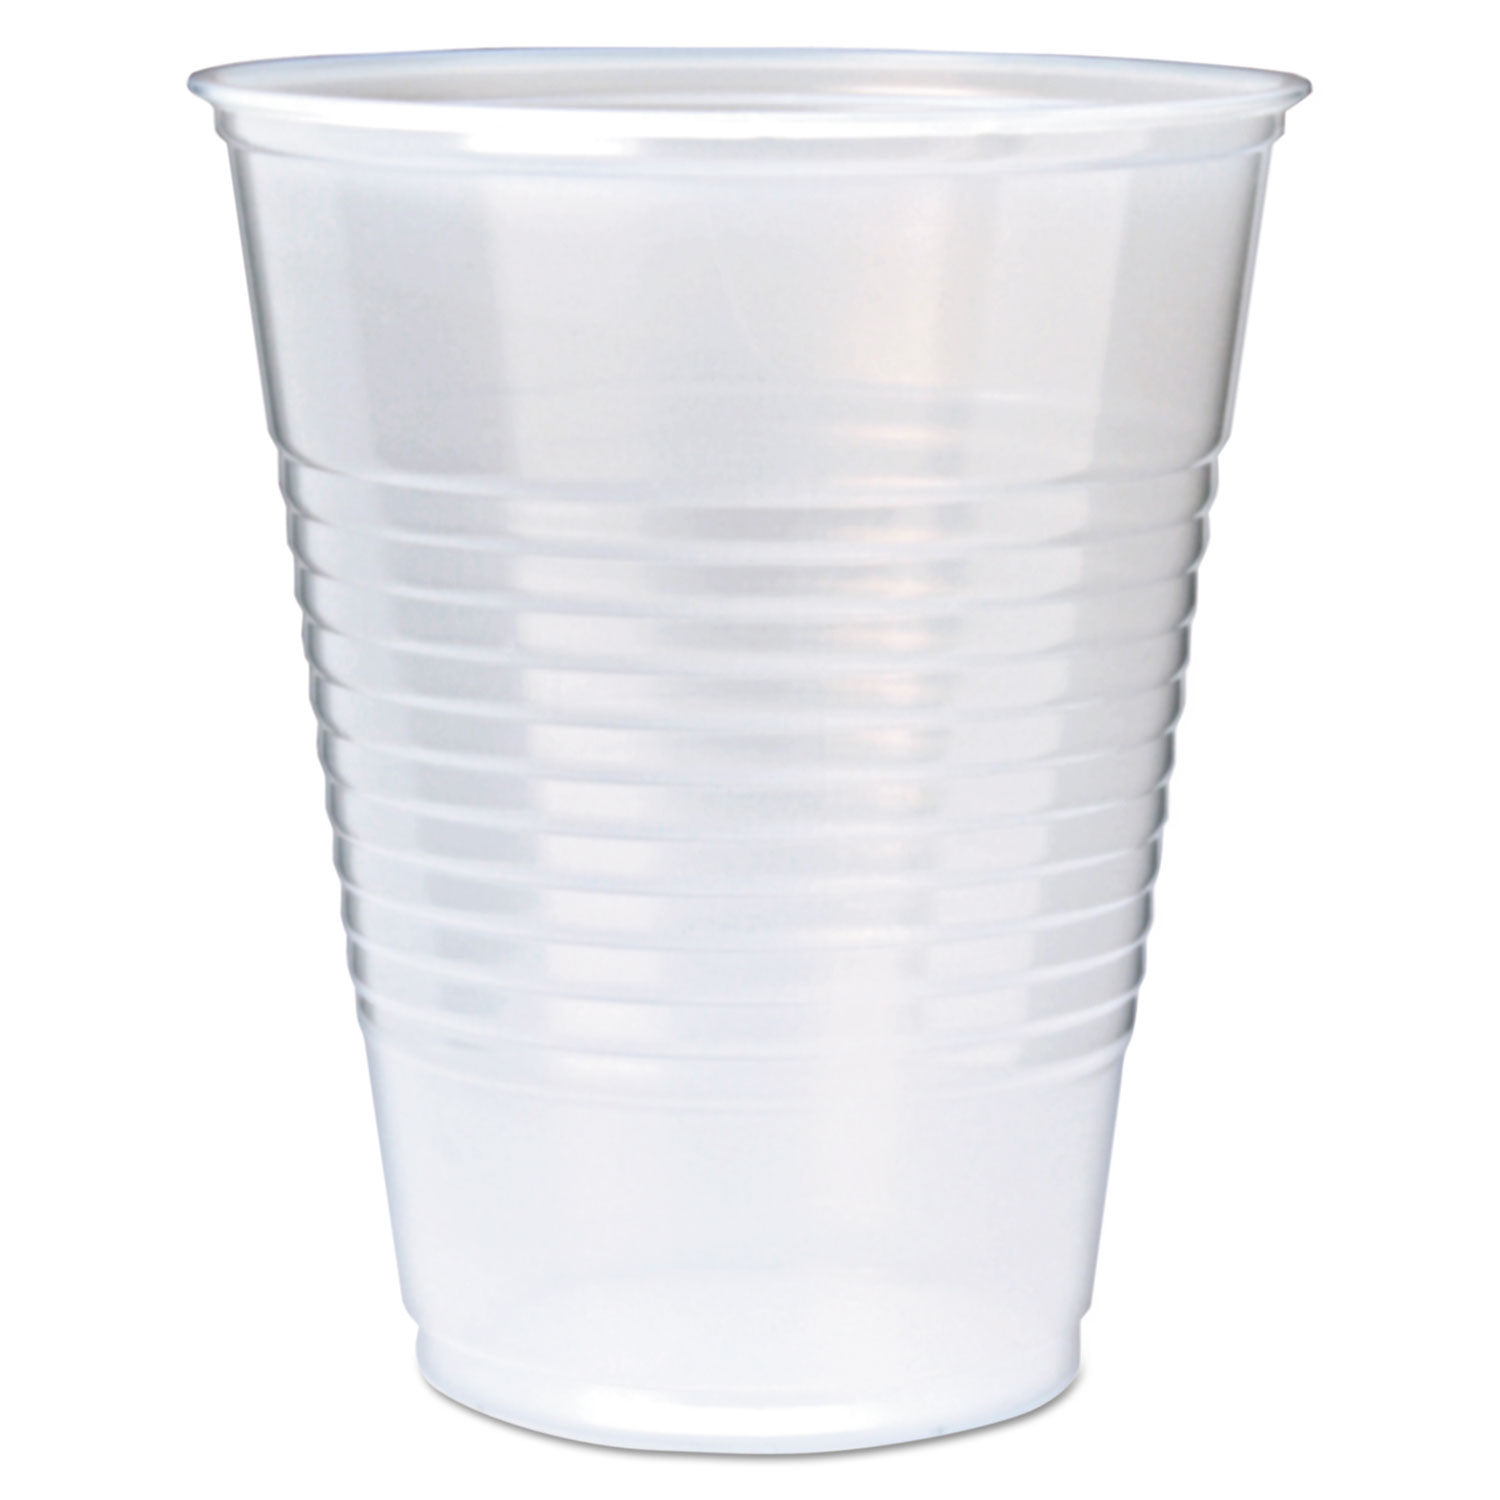  Fabri-Kal 9508028 RK Ribbed Cold Drink Cups, 12oz, Translucent, 50/Sleeve, 20 Sleeves/Carton (FABRK12) 